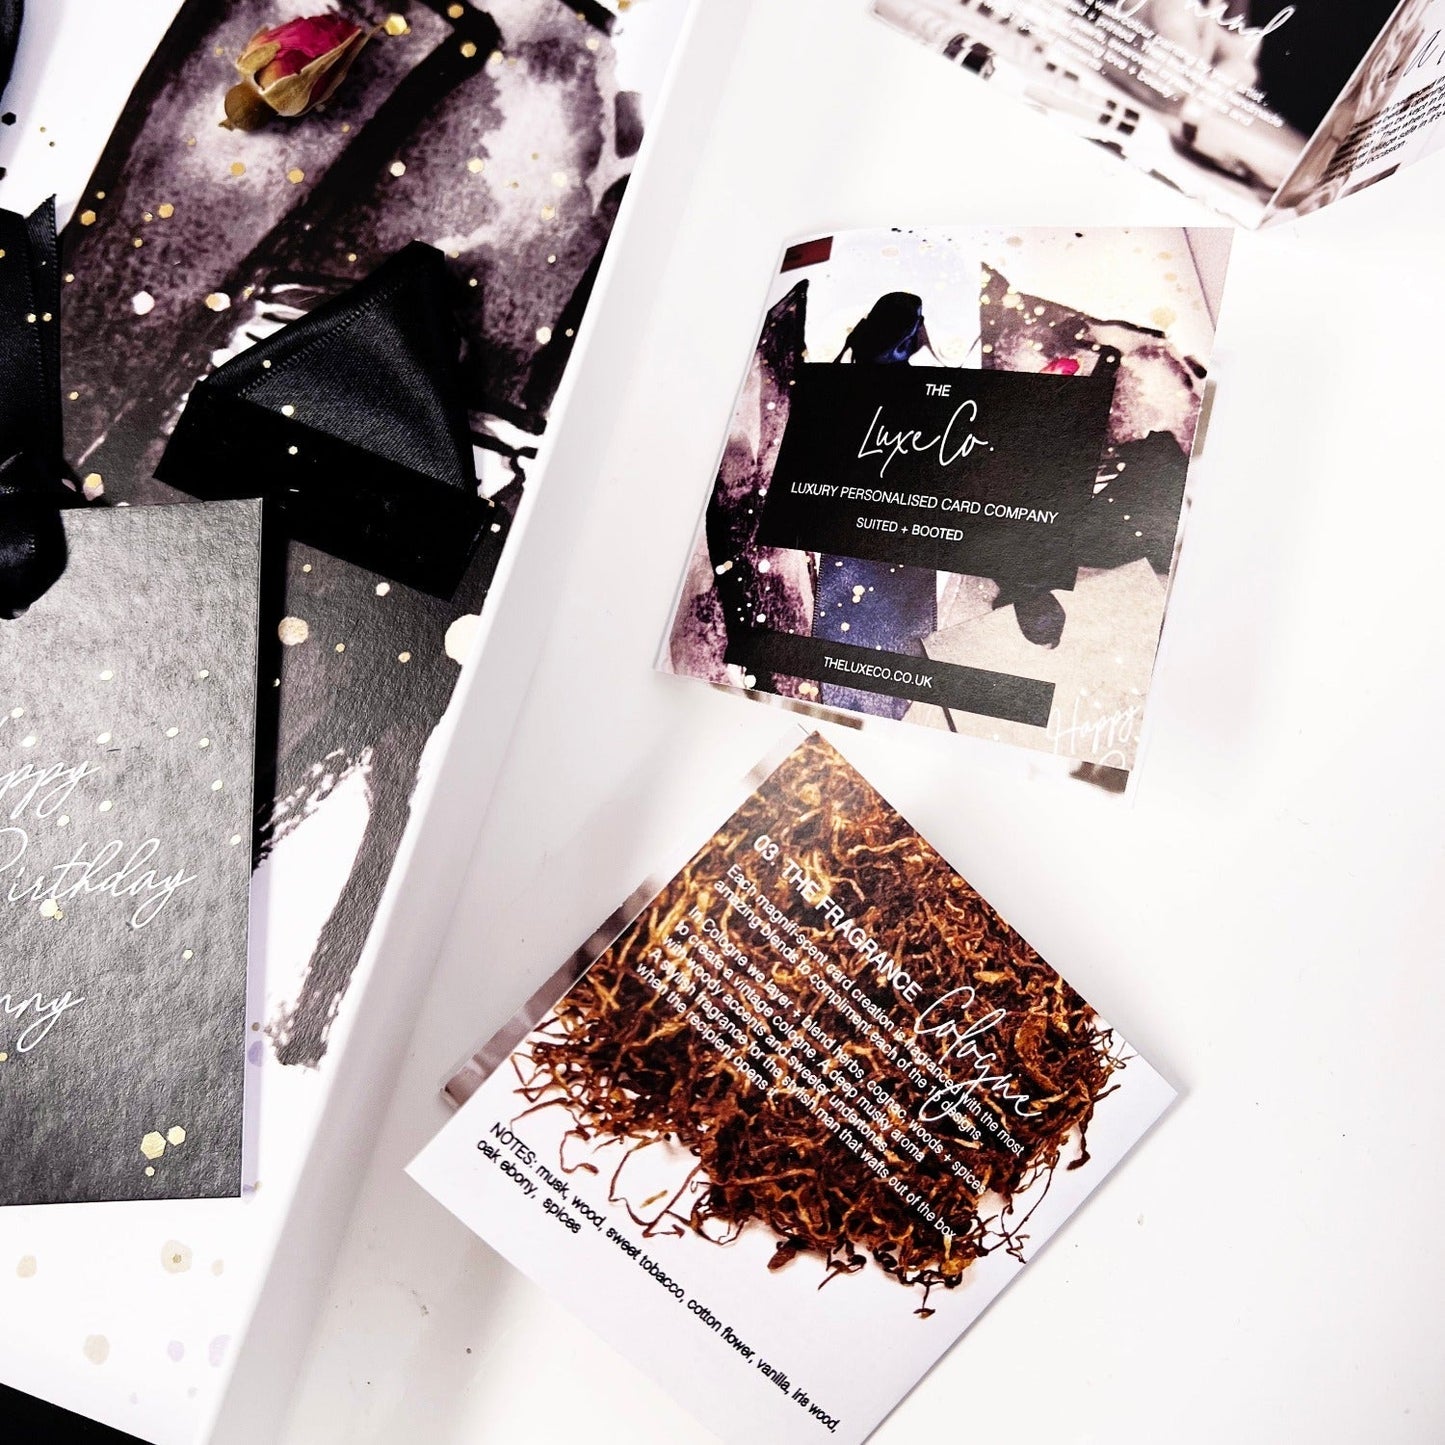 Husband cards scented with cologne. The most amazing luxury cards for him